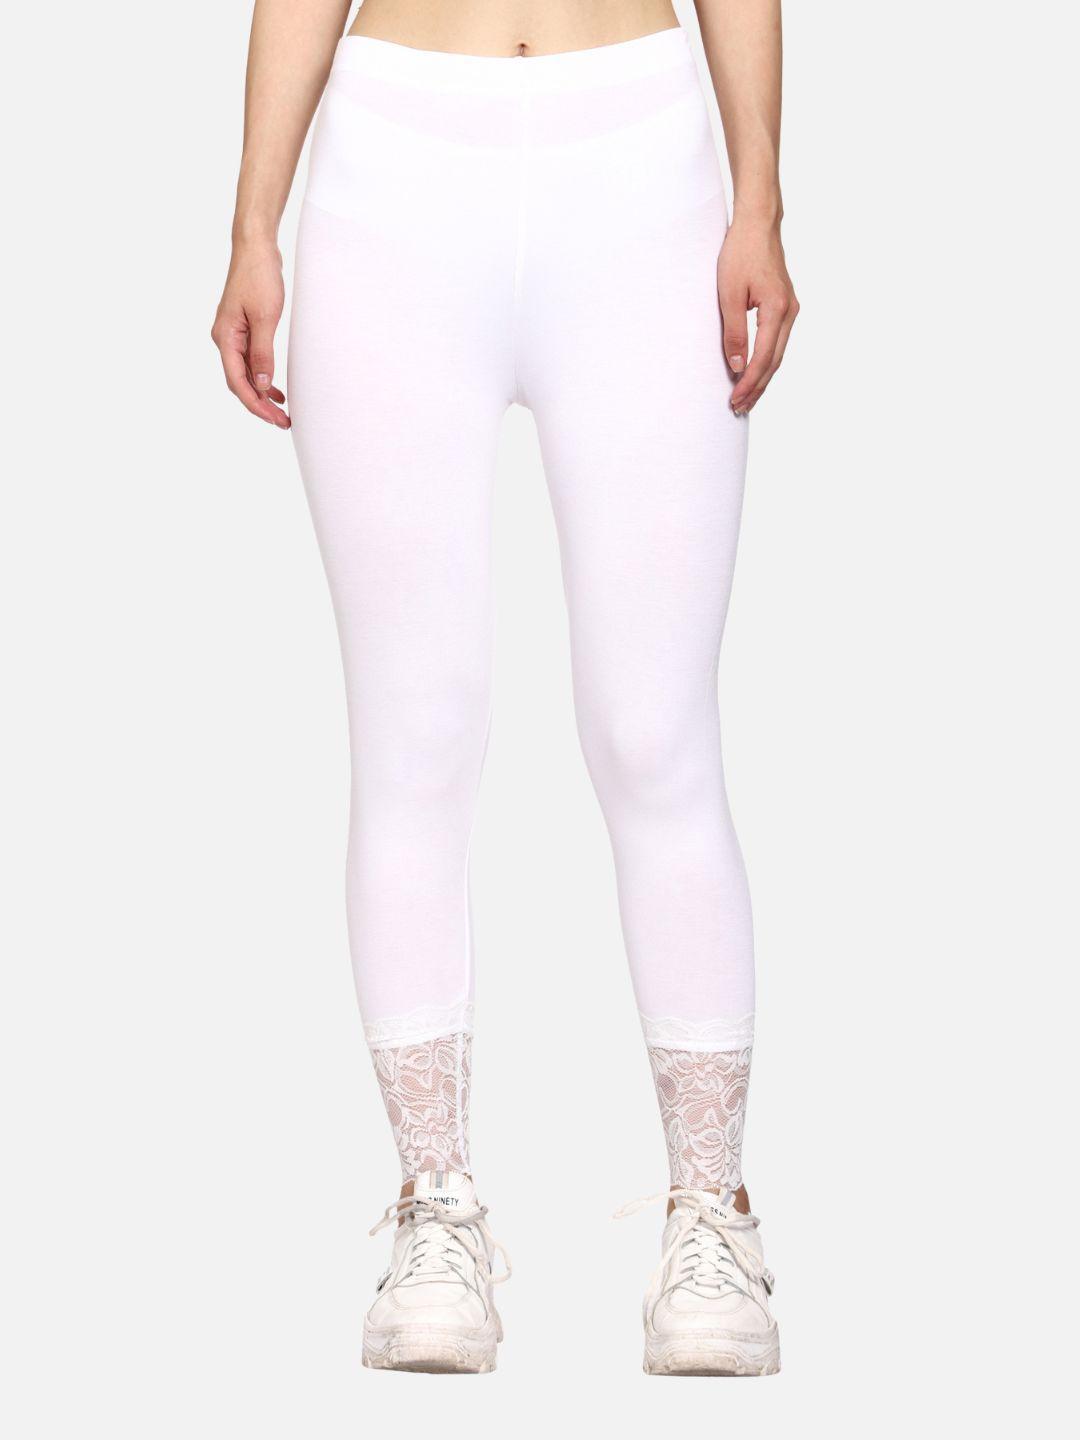 outflits women white solid ankle-length leggings with lace